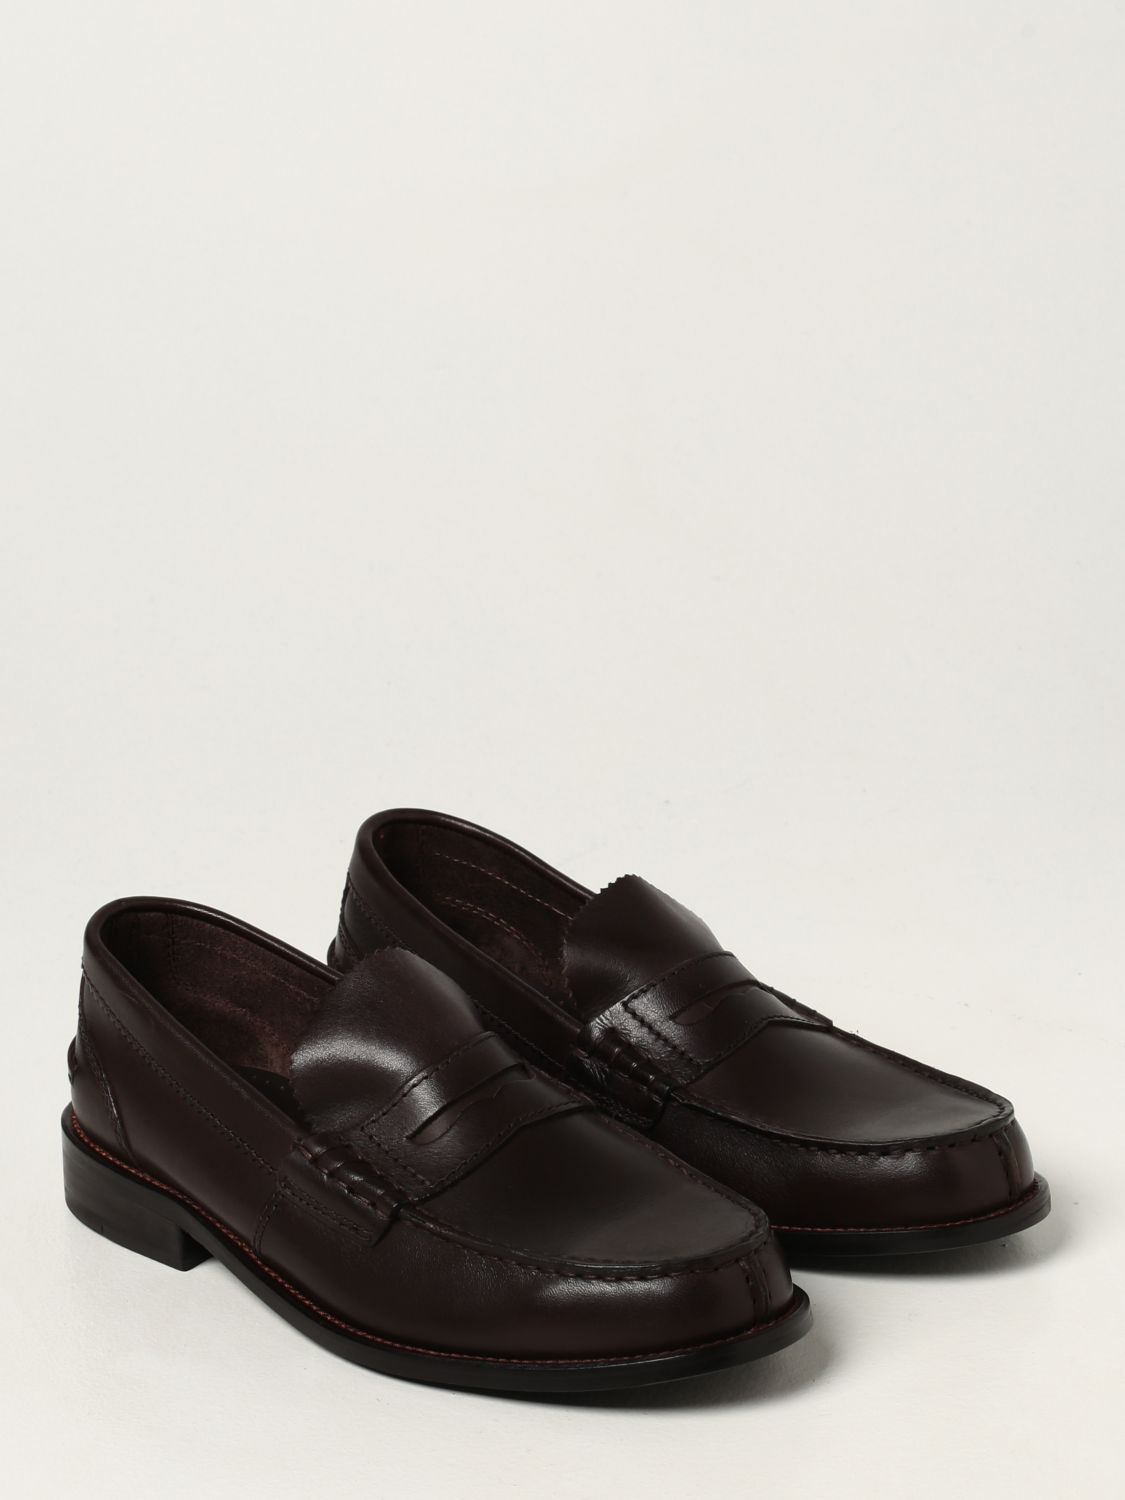 CLARKS: loafers for man - Brown | Clarks loafers 2034 98 online on ...